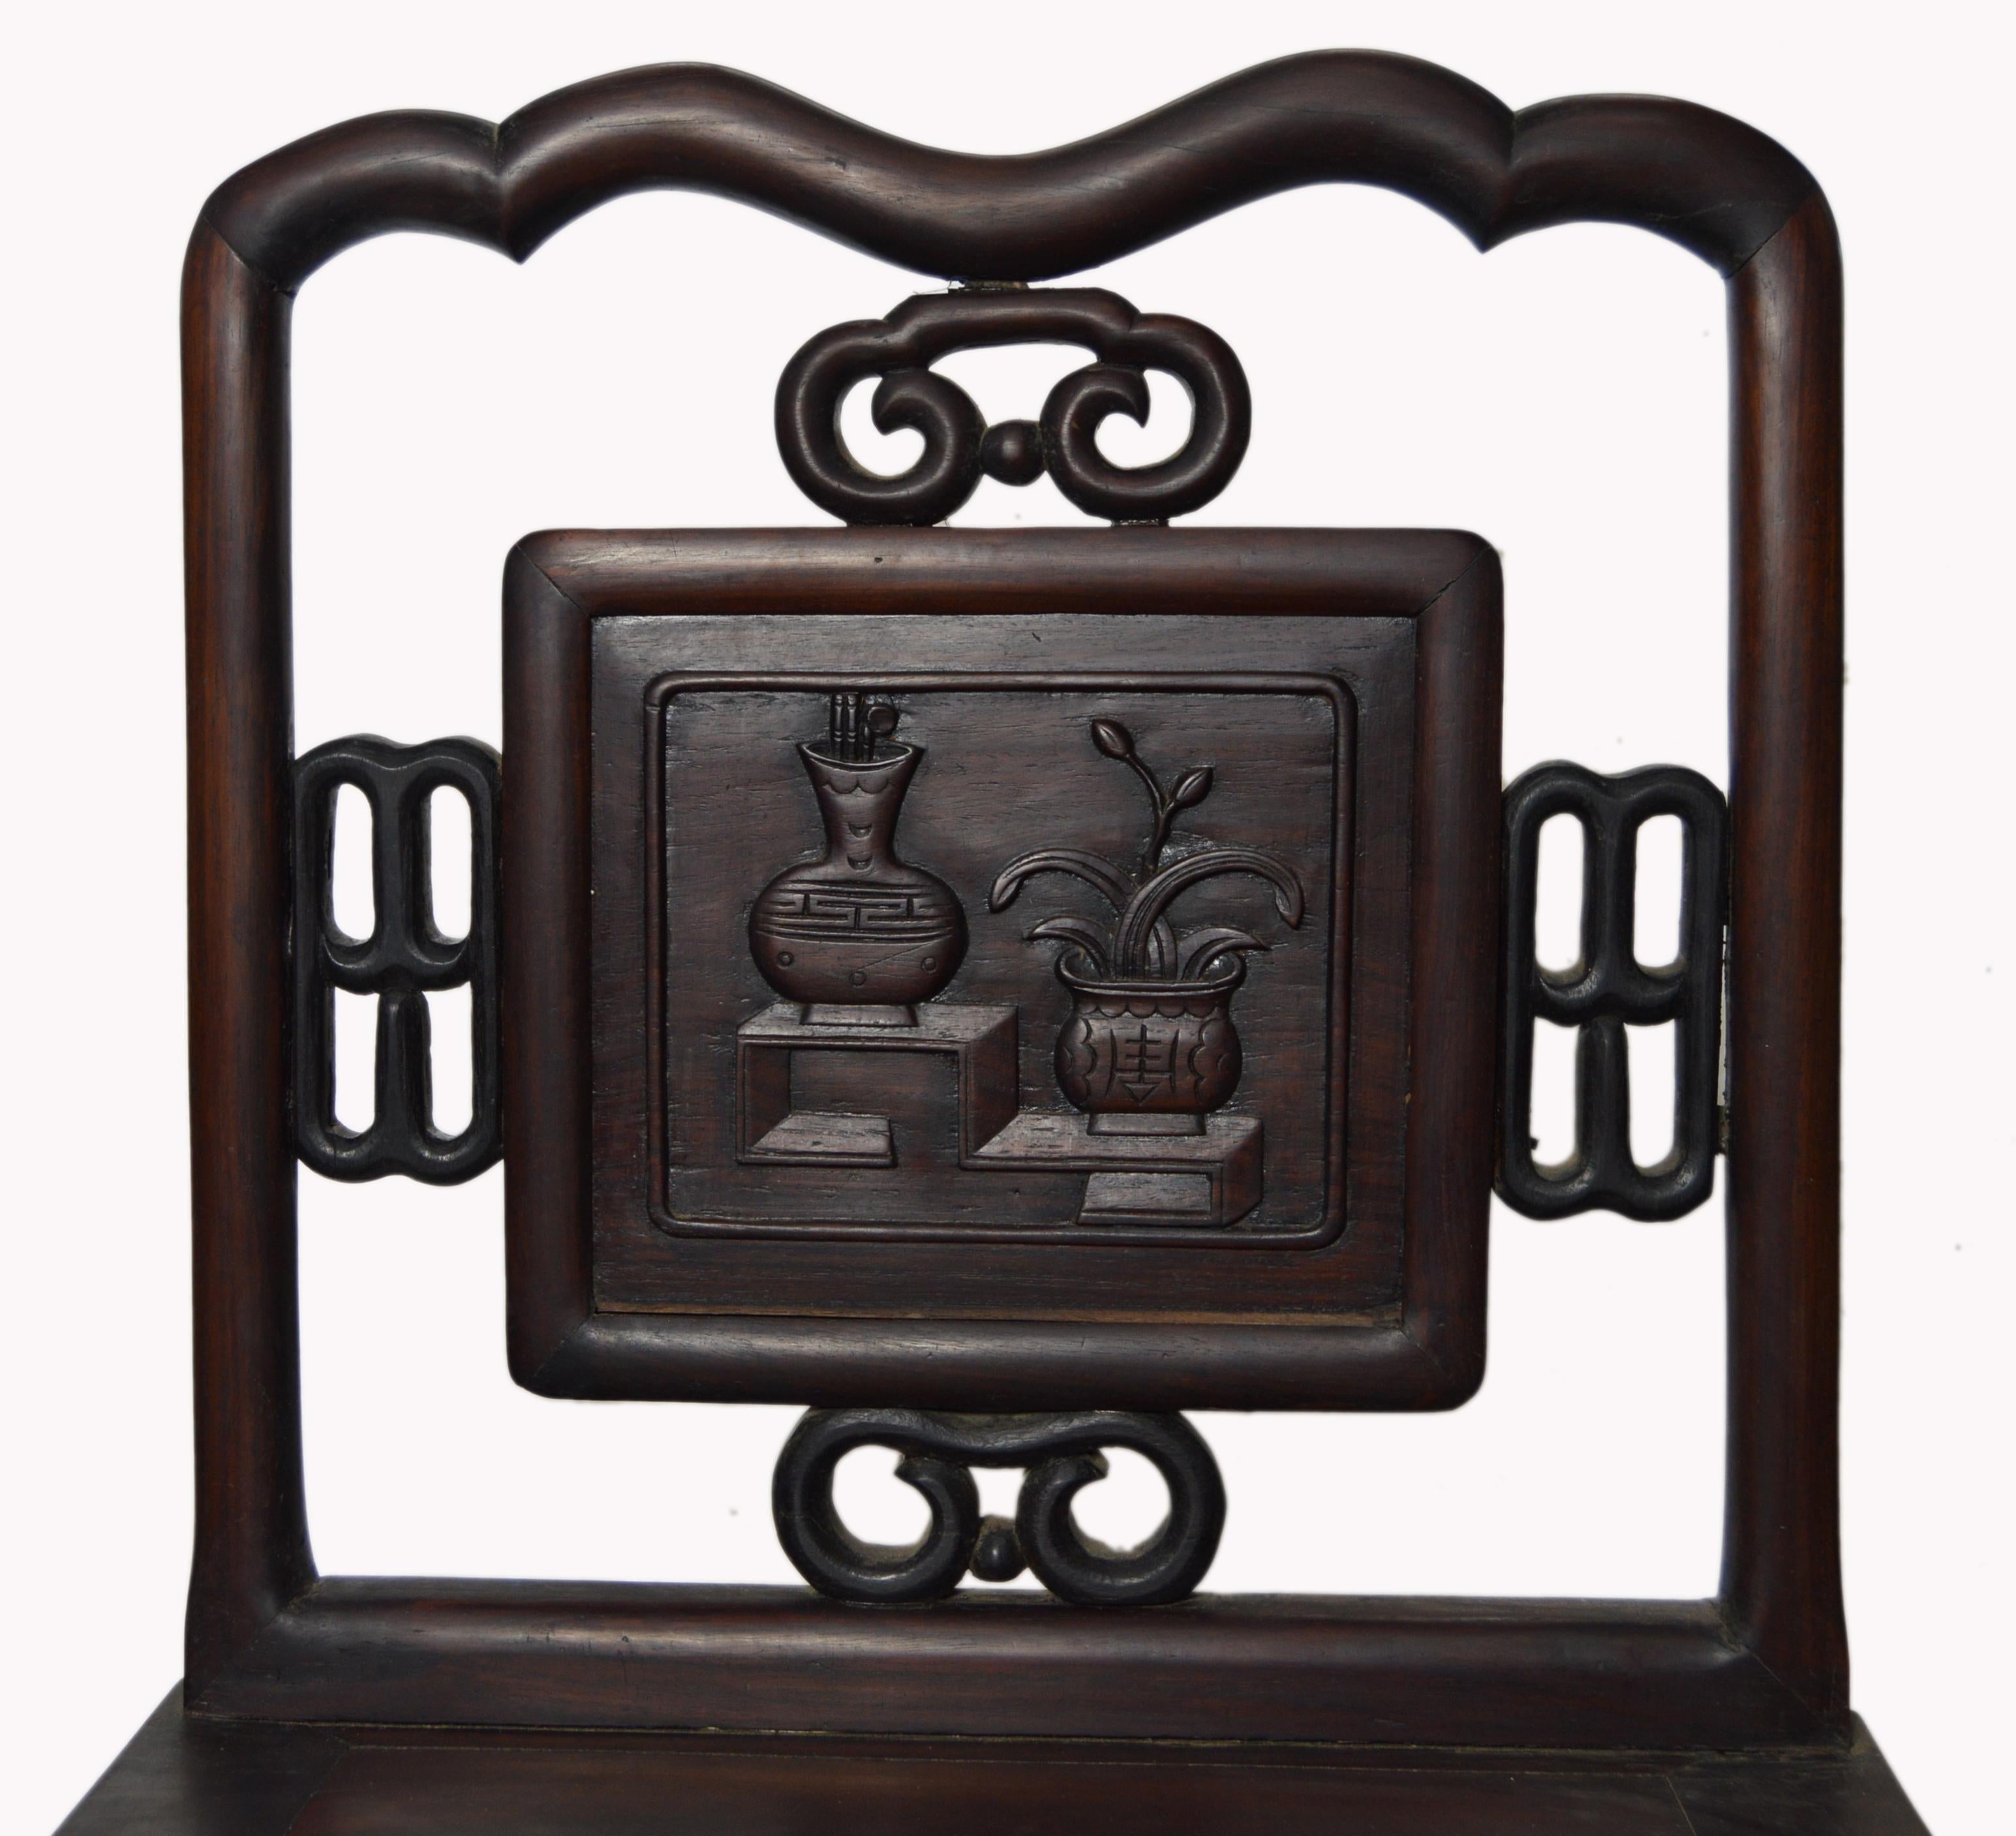 A hand-carved Chinese yumu wood accent chair from the early 20th century, with dark brown lacquer finish, fretwork motifs and carved splat. This exquisite Chinese side chair features a rectangular pierced back with undulating crest, adorned with a